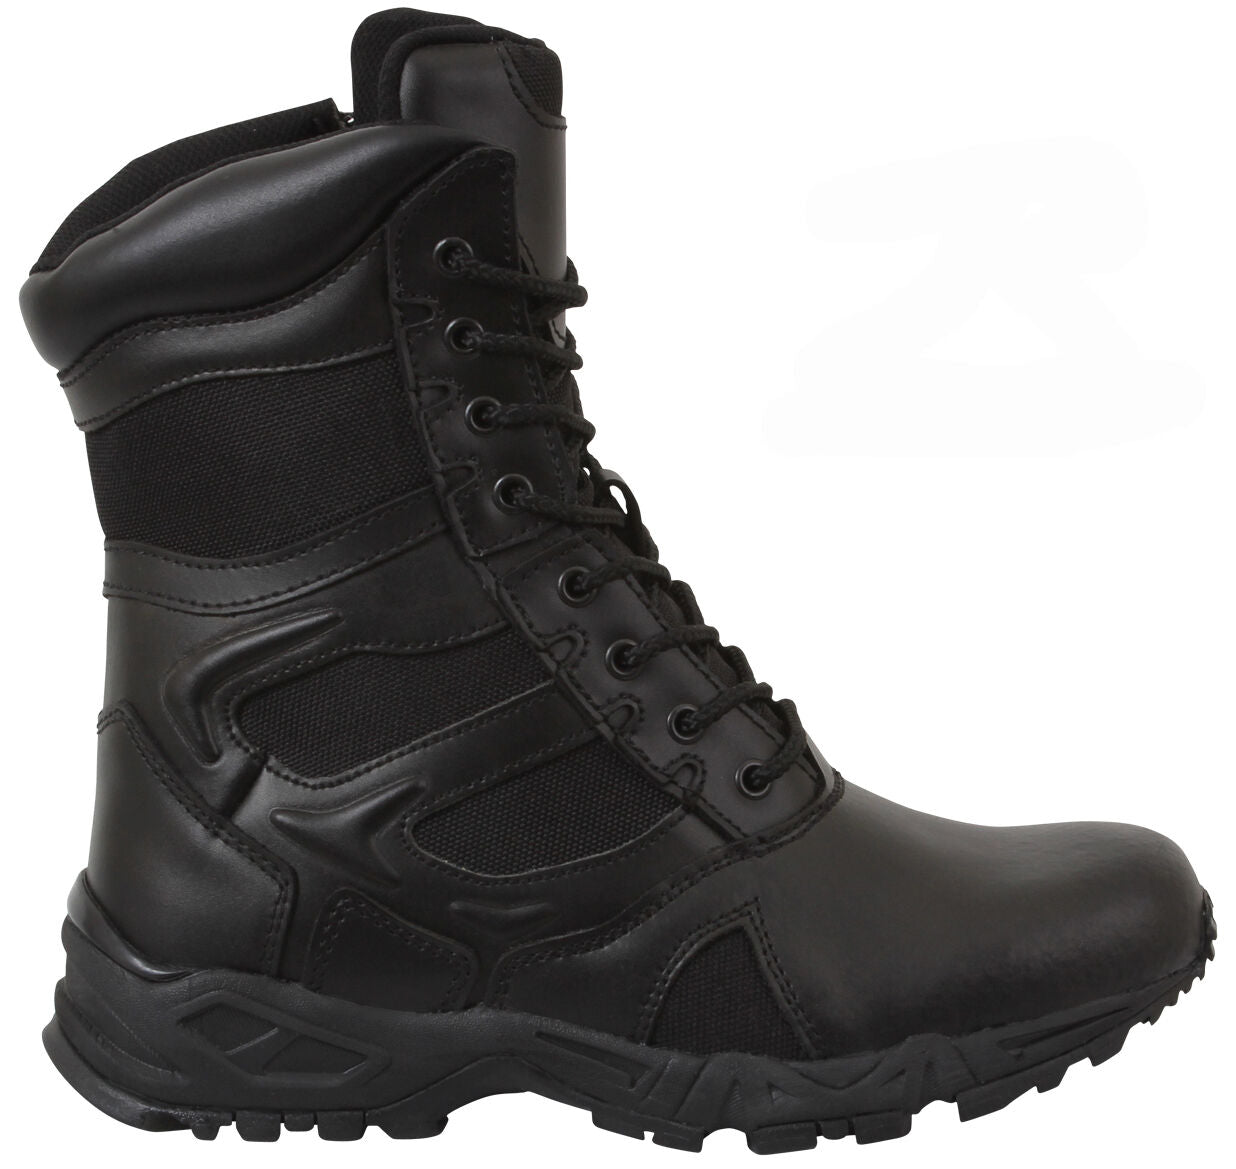 Rothco Forced Entry Deployment Boot With Side Zipper - 8 Inch Black